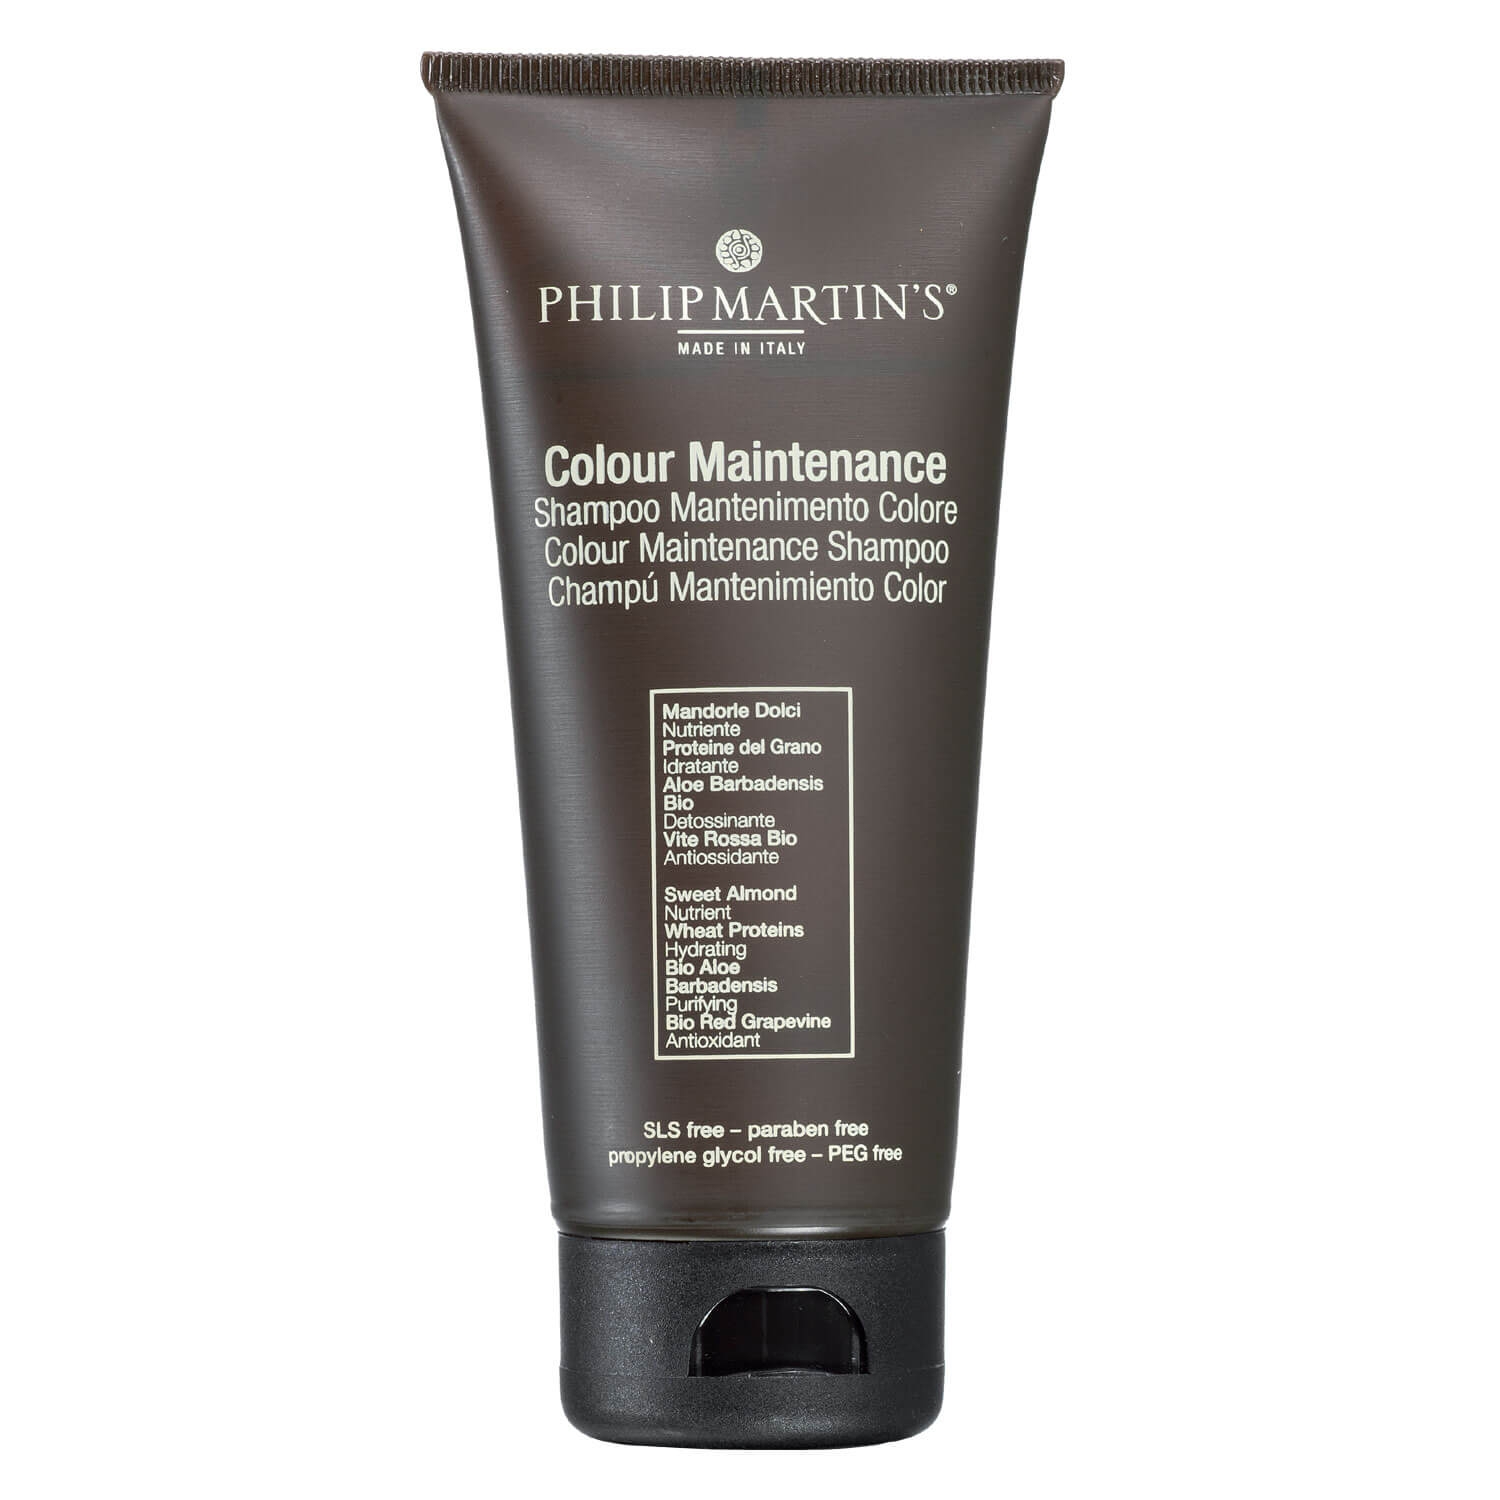 Product image from Philip Martin's - Colour Maintenance